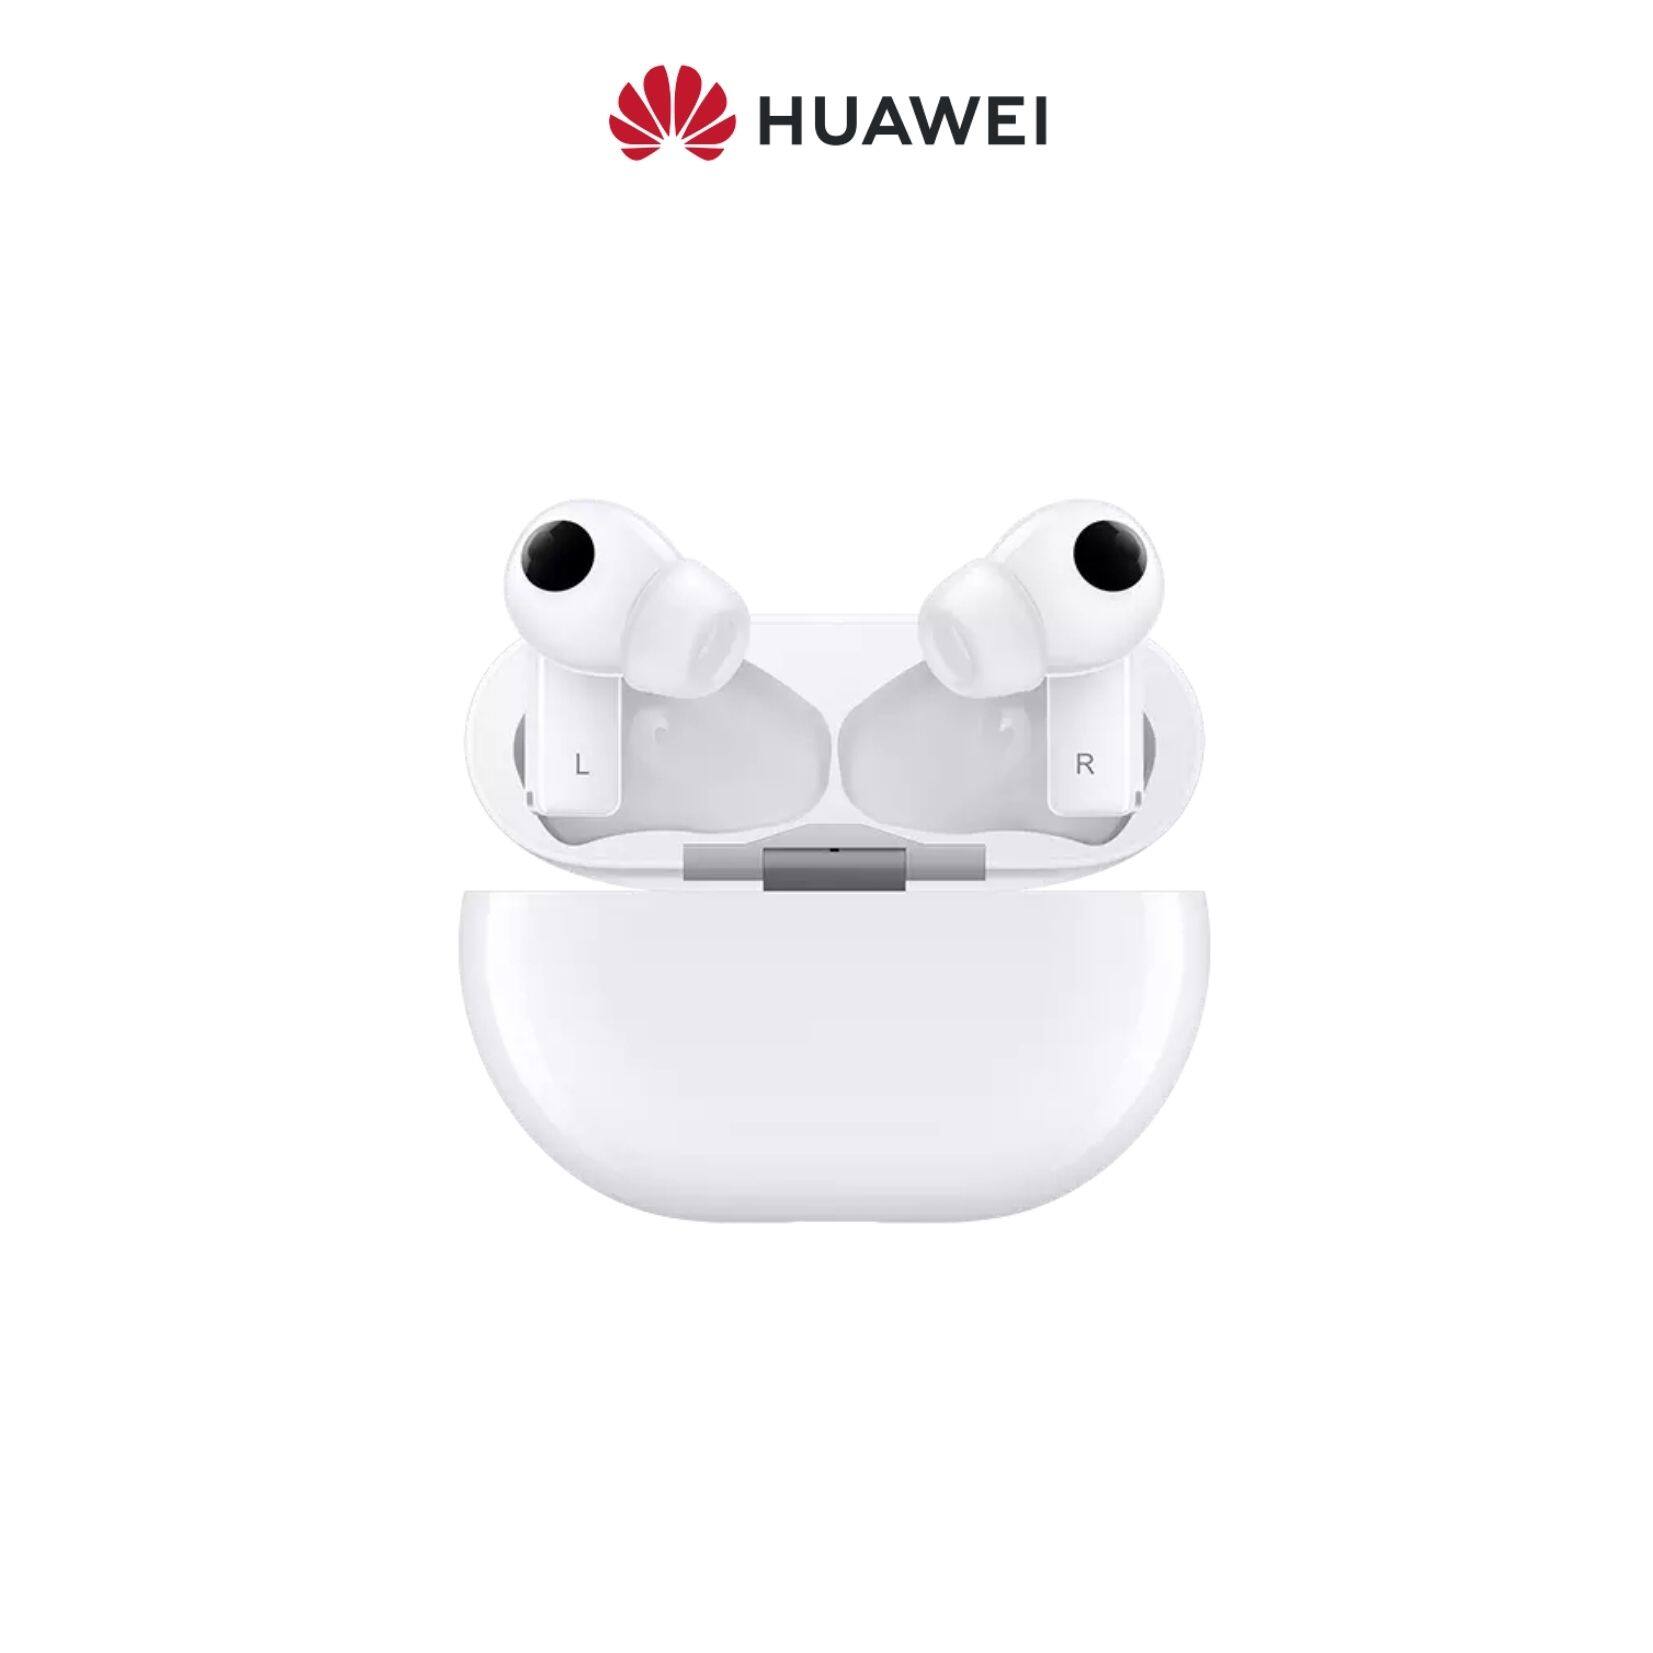 HUAWEI FreeBuds Pro Wireless Headphone - Noise Cancellation | Dual Antenna | Smart Control | 30 Hours Play Time